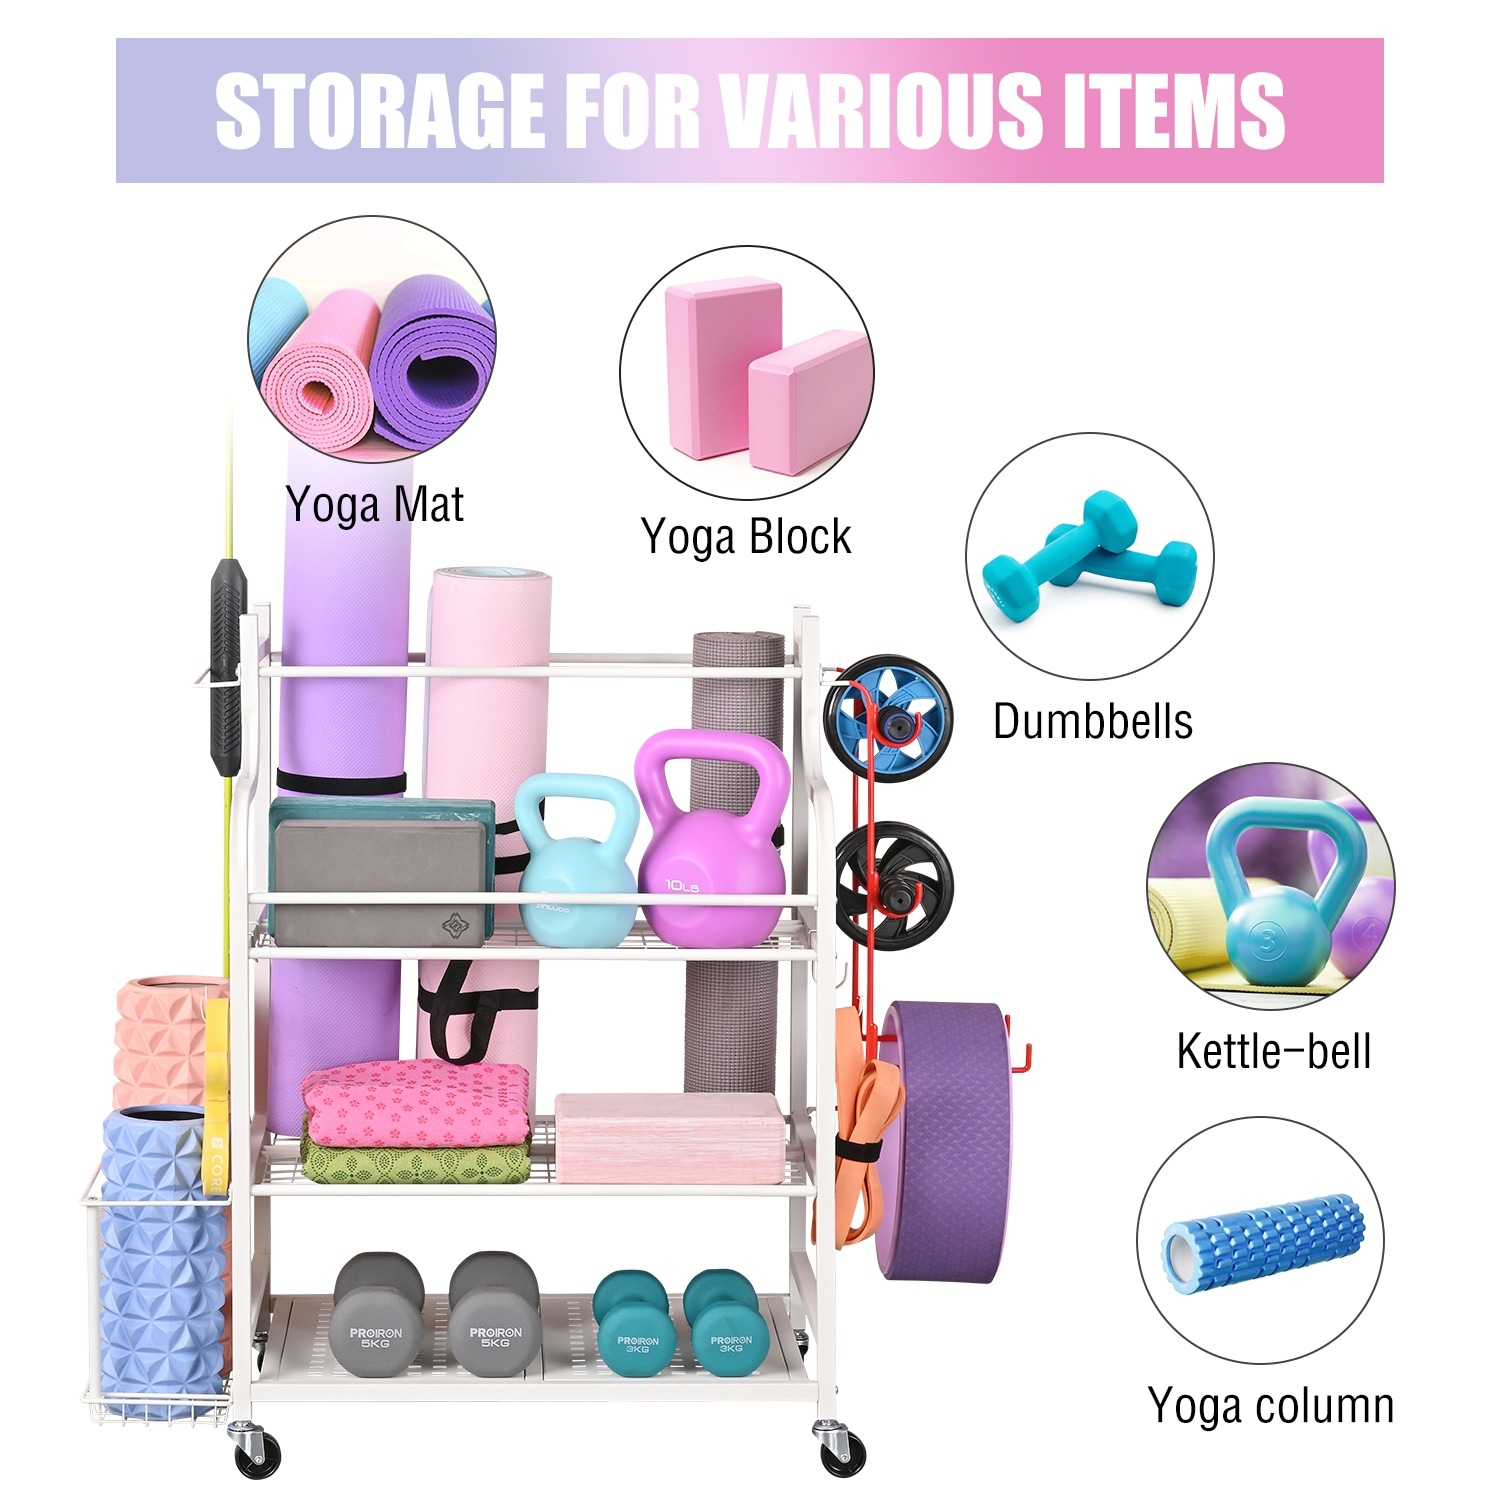  Weight Rack for Home Gym Dumbell Rack Fabric Yoga Mat  Storage,Organizes Yoga Mats,Foam Rollers,Dumbbells,Kettlebells &  More,Women's Men's Fitness Workout Equipment Organization,White Small  Weight Rack : Sports & Outdoors